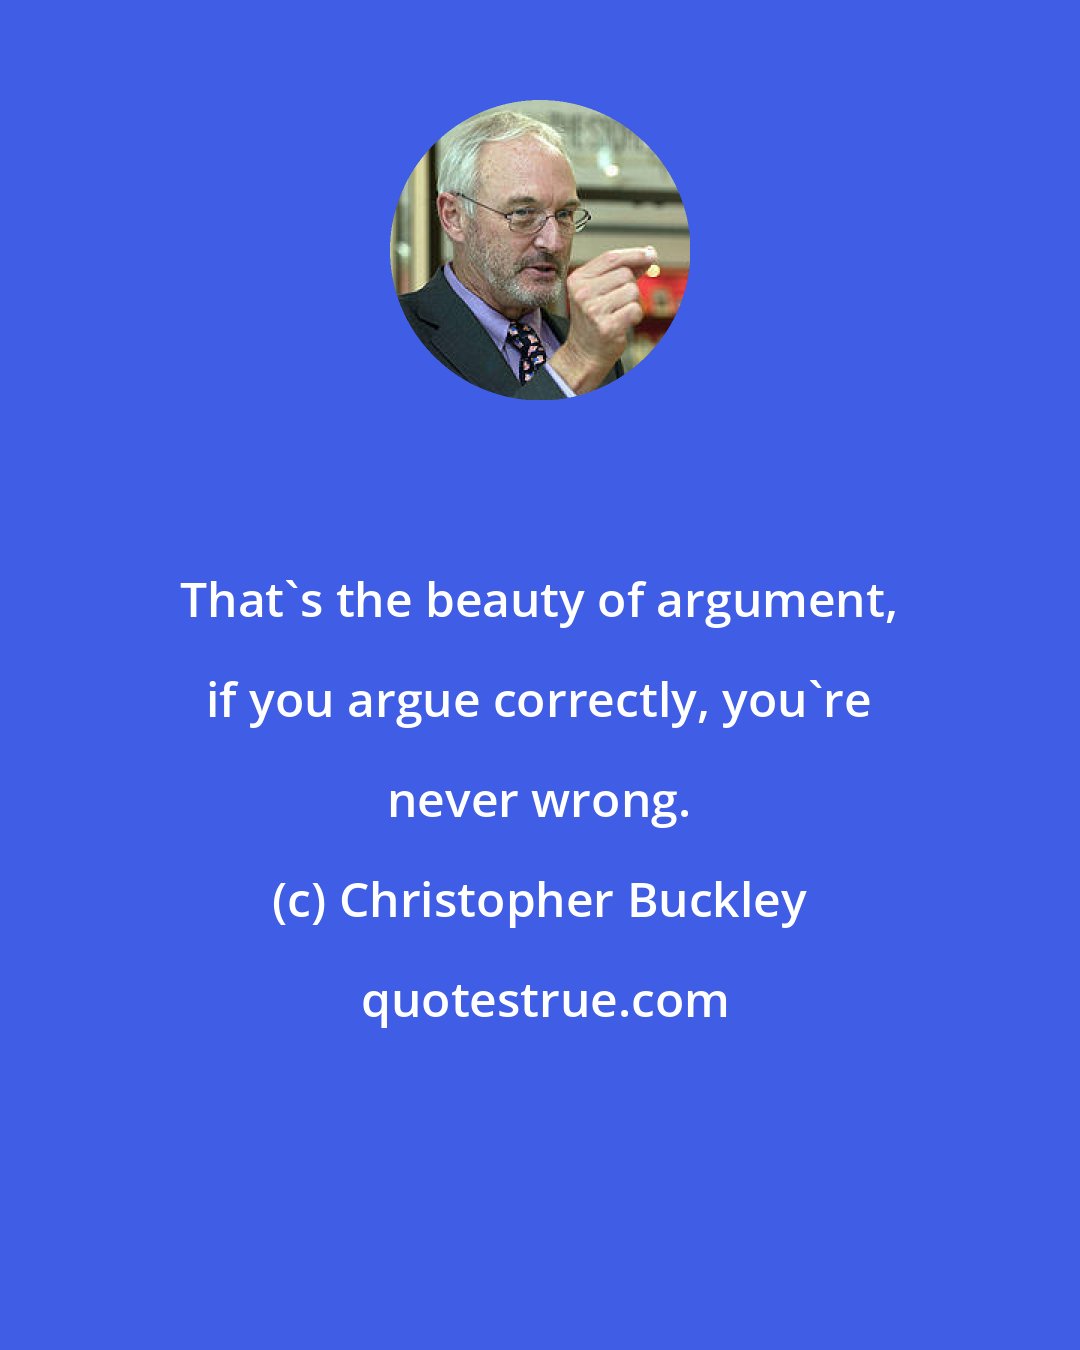 Christopher Buckley: That's the beauty of argument, if you argue correctly, you're never wrong.